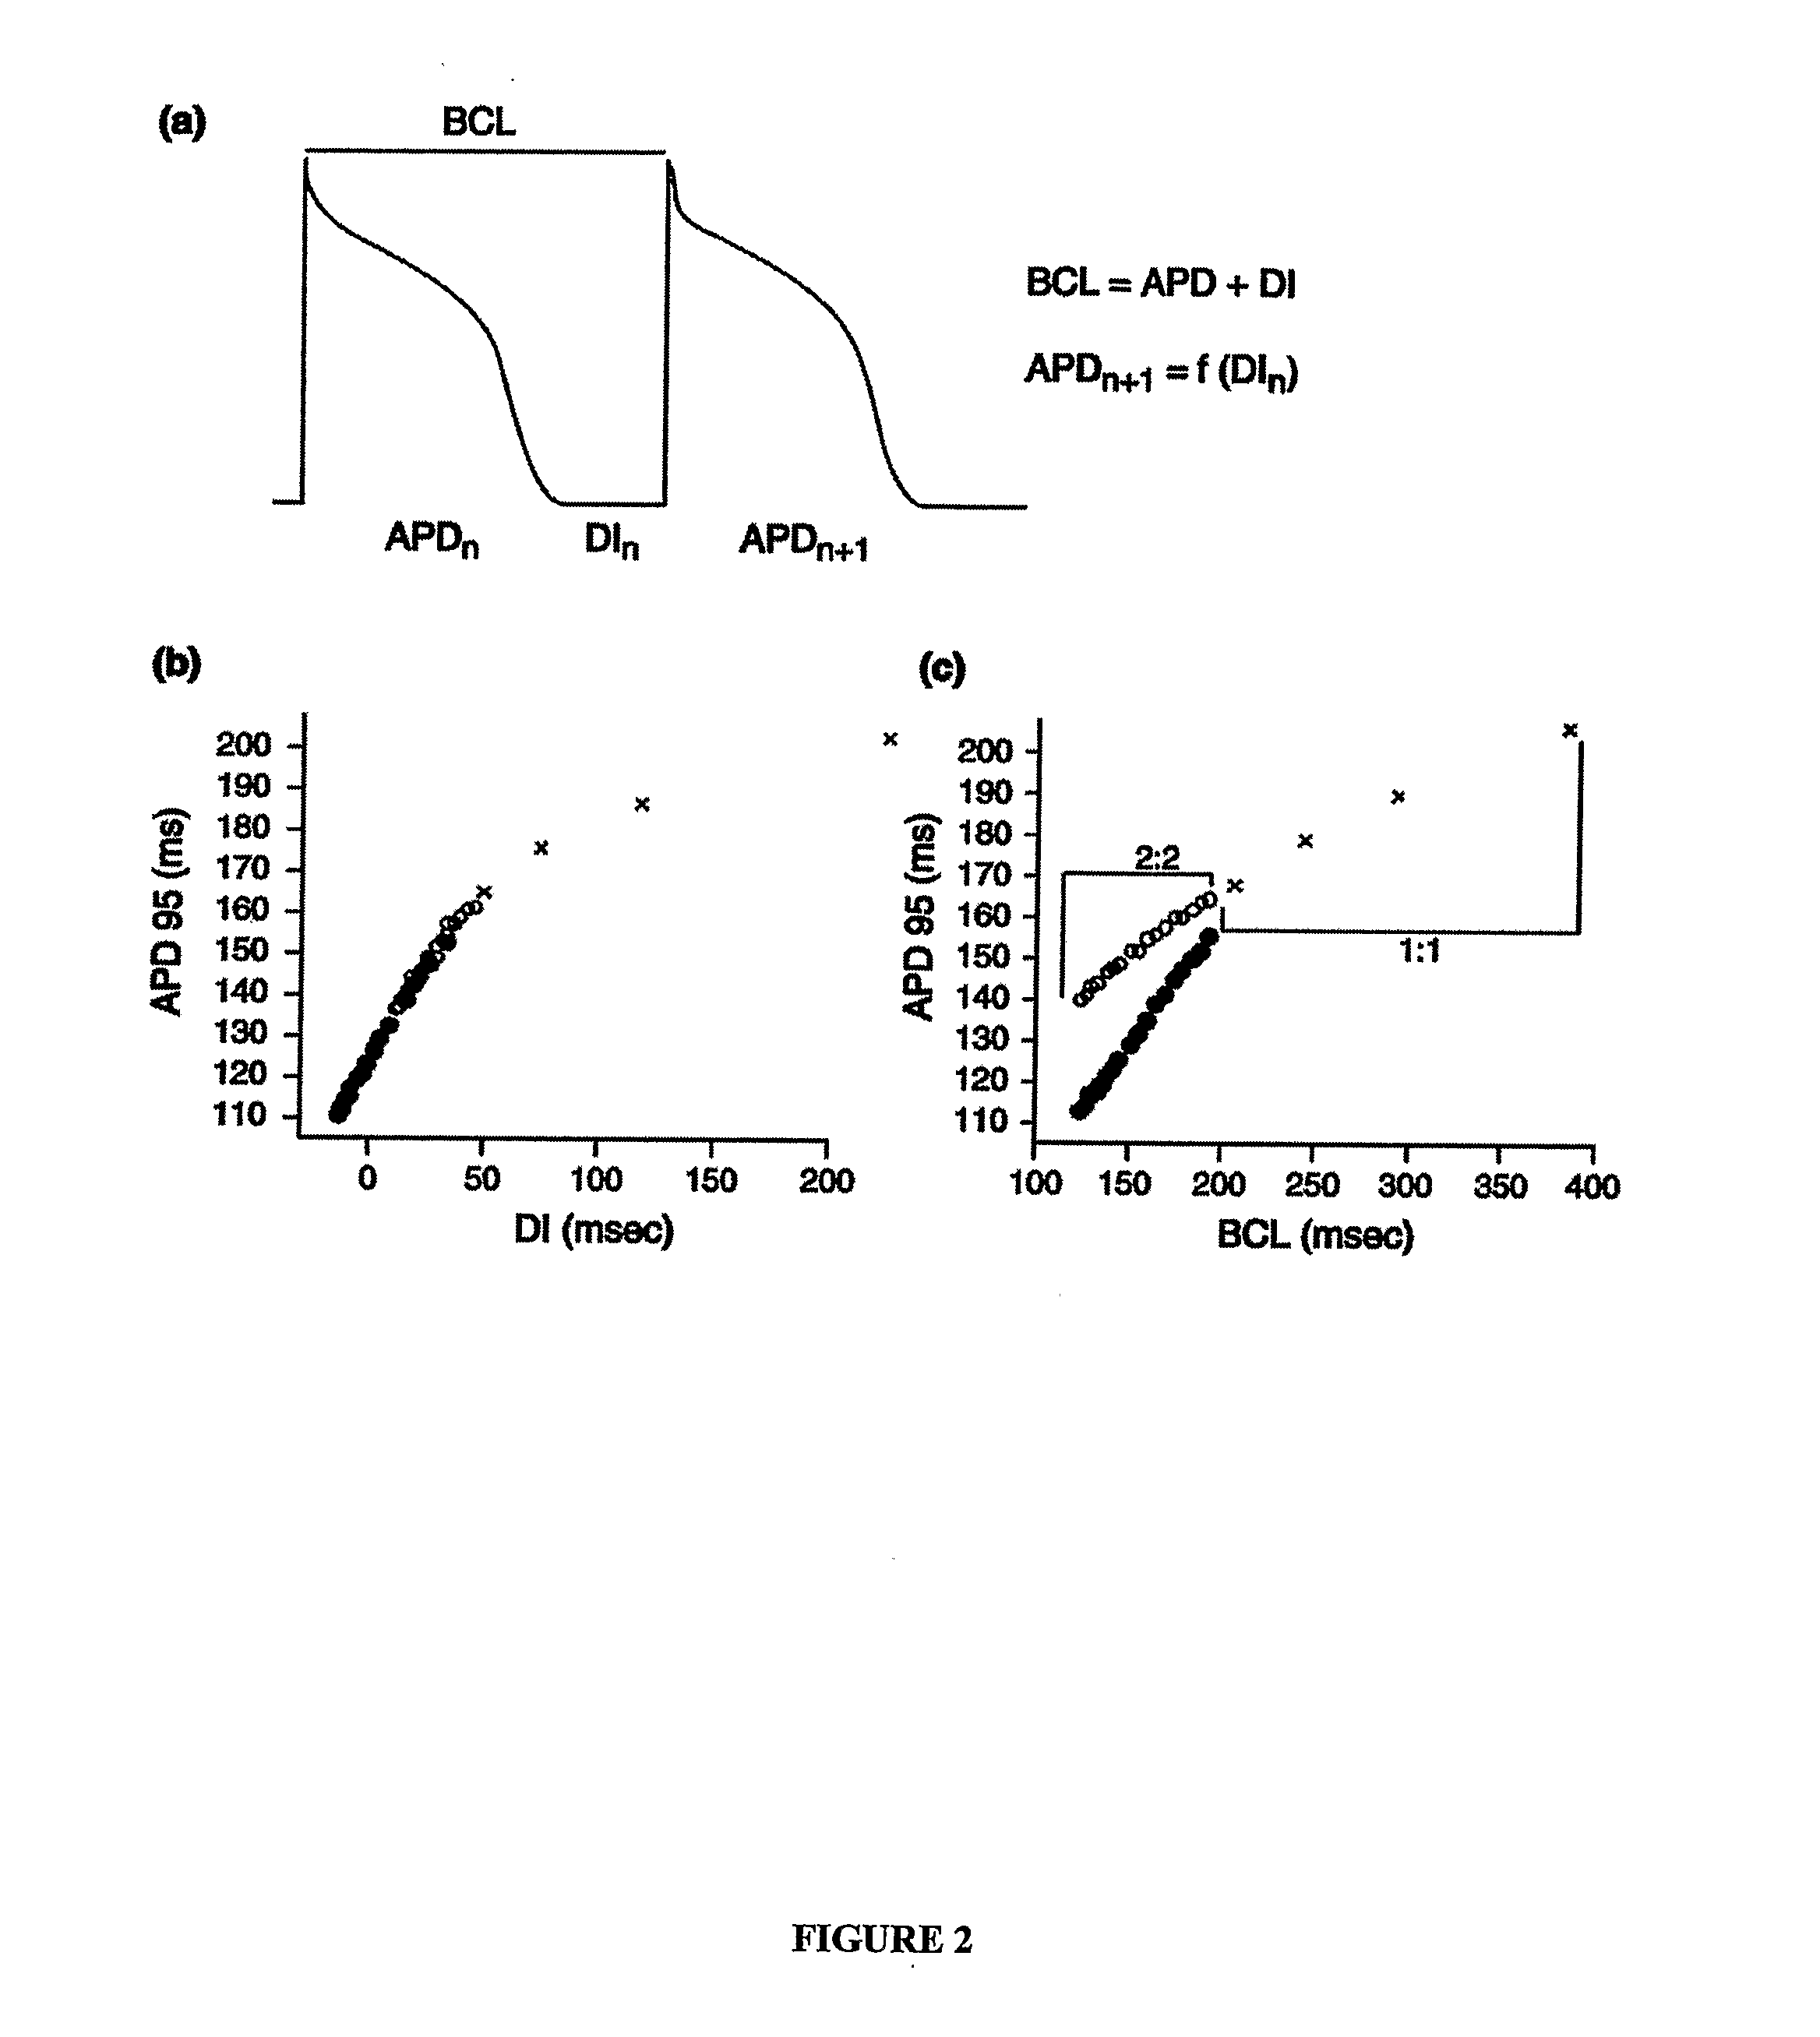 Method of Identifying Strategies for Treatment or Prevention of Ventricular Fibrillation and Ventricular Tachycardia